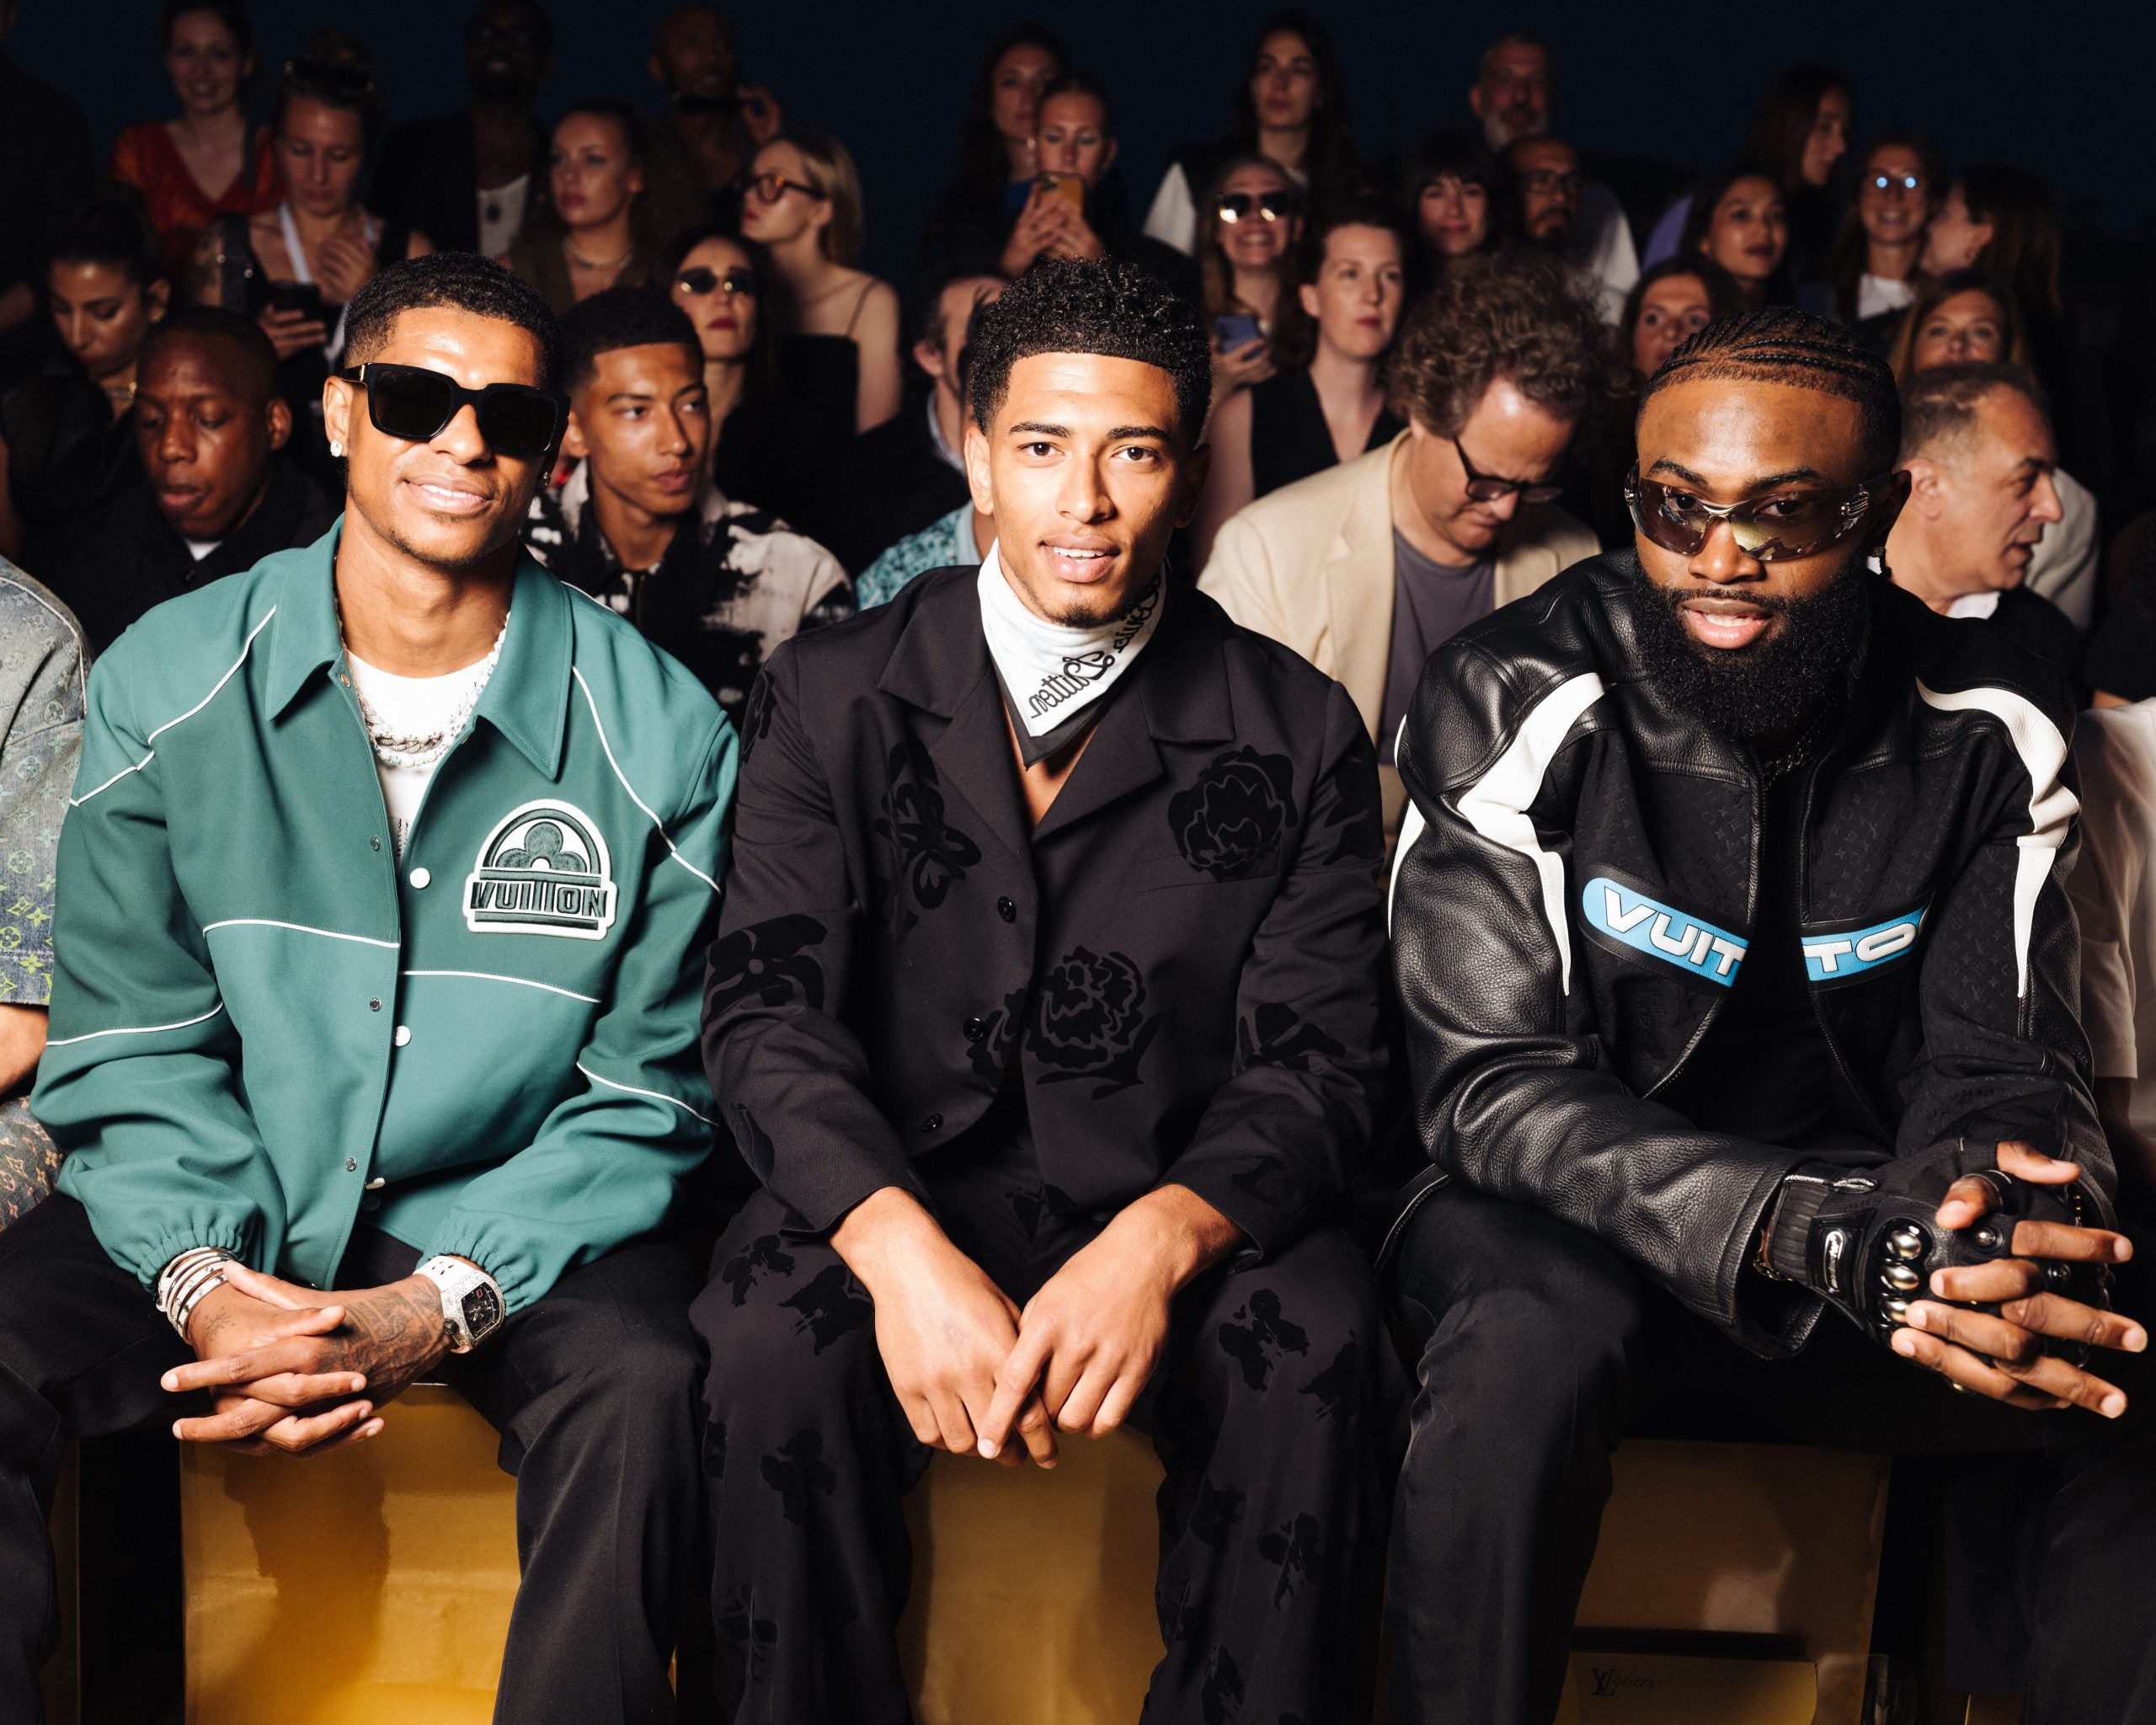 The Best Front Row Looks At The Louis Vuitton Men's Runway Show